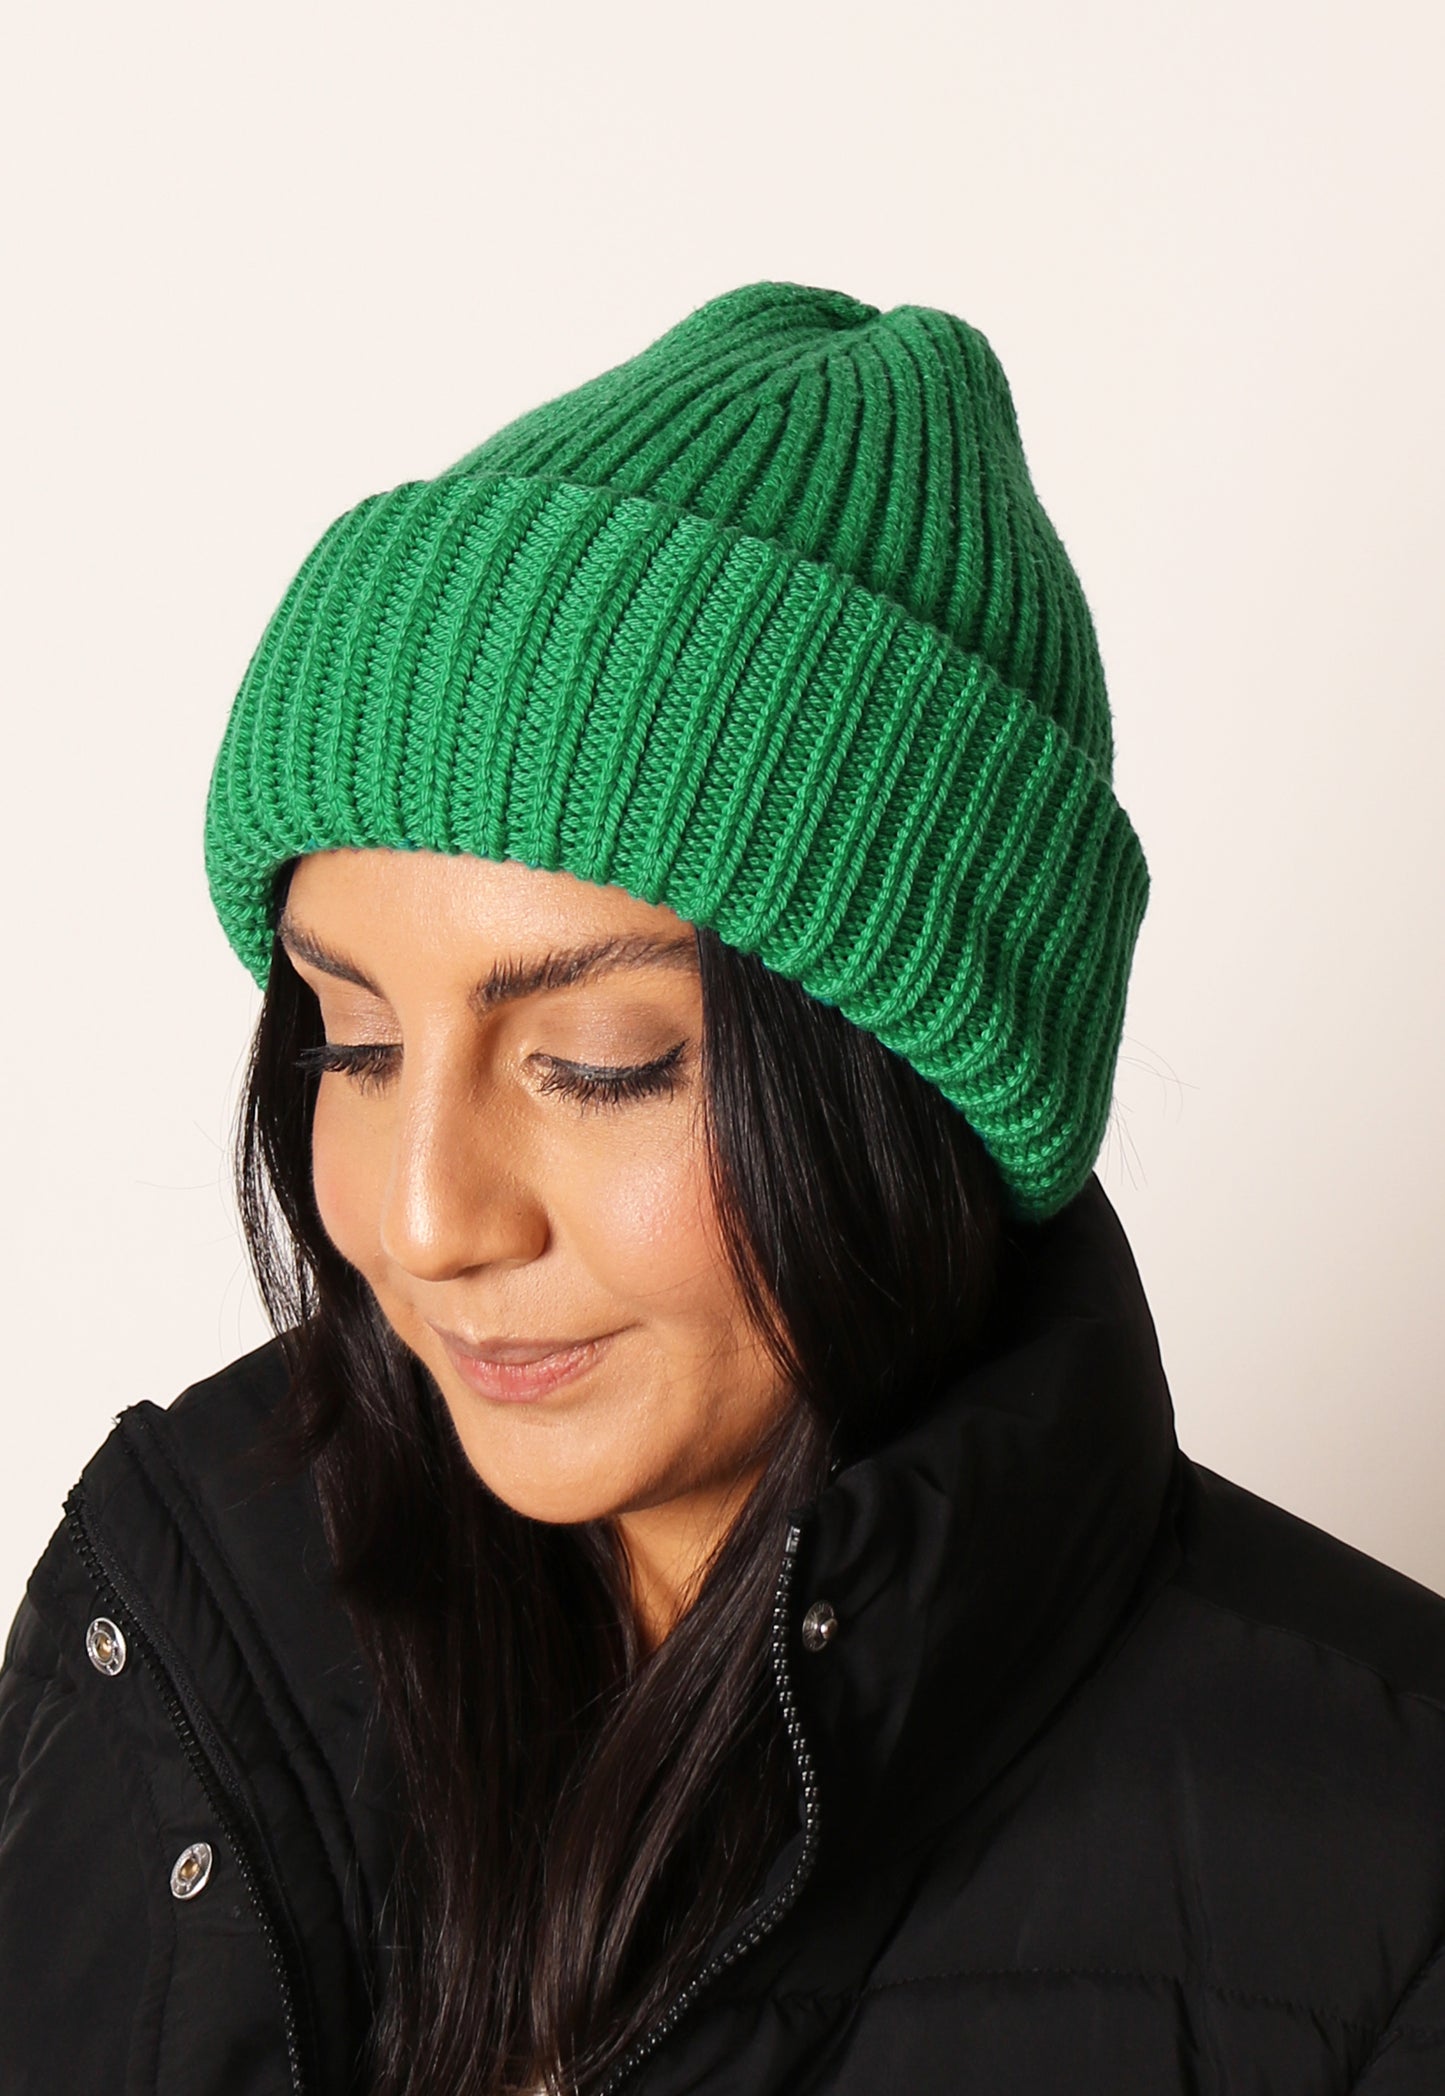 PIECES Juca Fisherman Rib Knit Beanie Hat in Green - One Nation Clothing